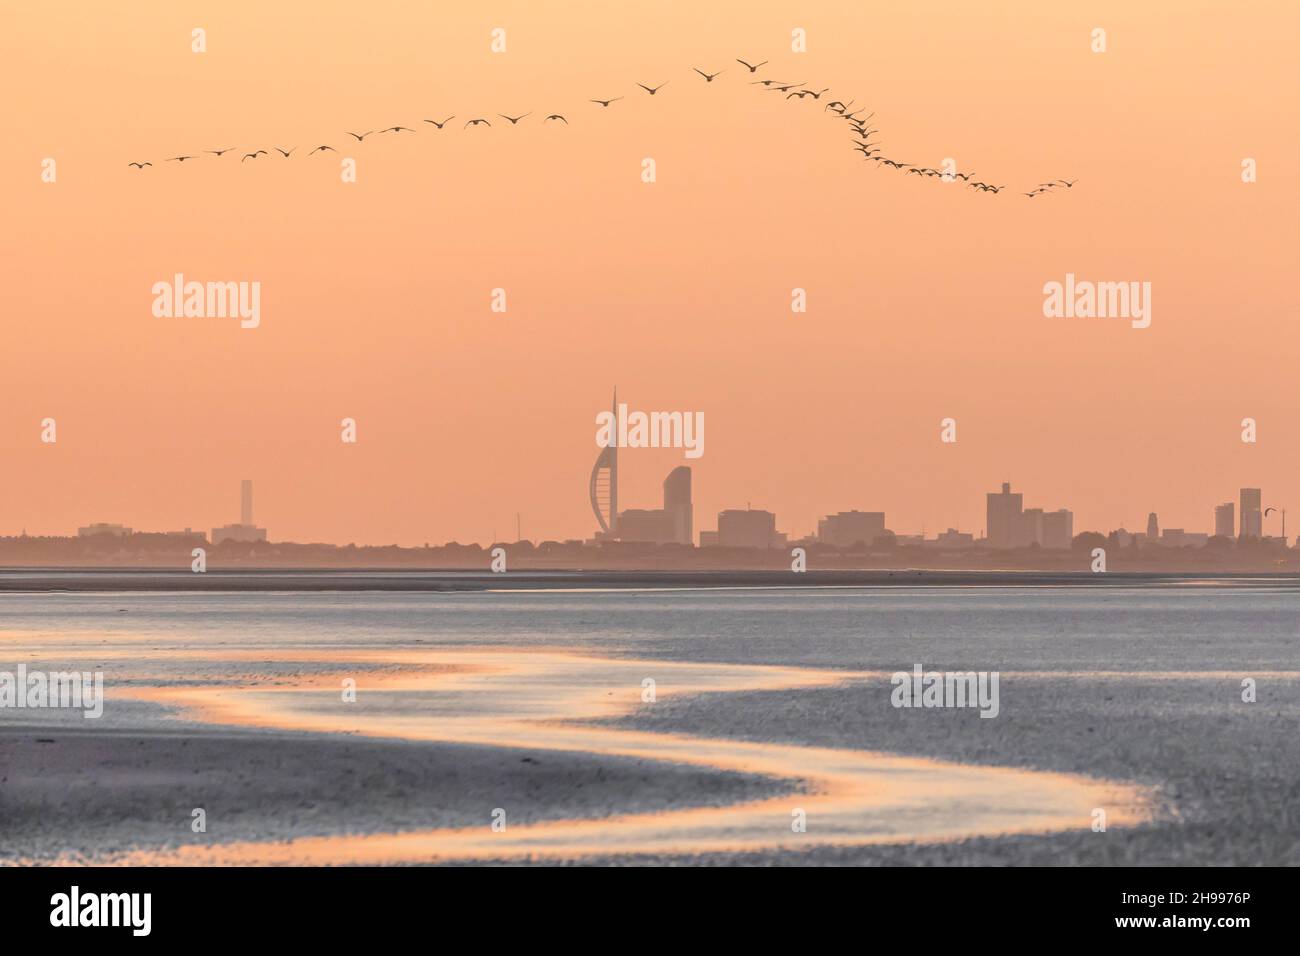 V shaped flying geese formation at sunset over West Wittering beach with Portsmouth and the Spinnaker Tower in the distance Stock Photo